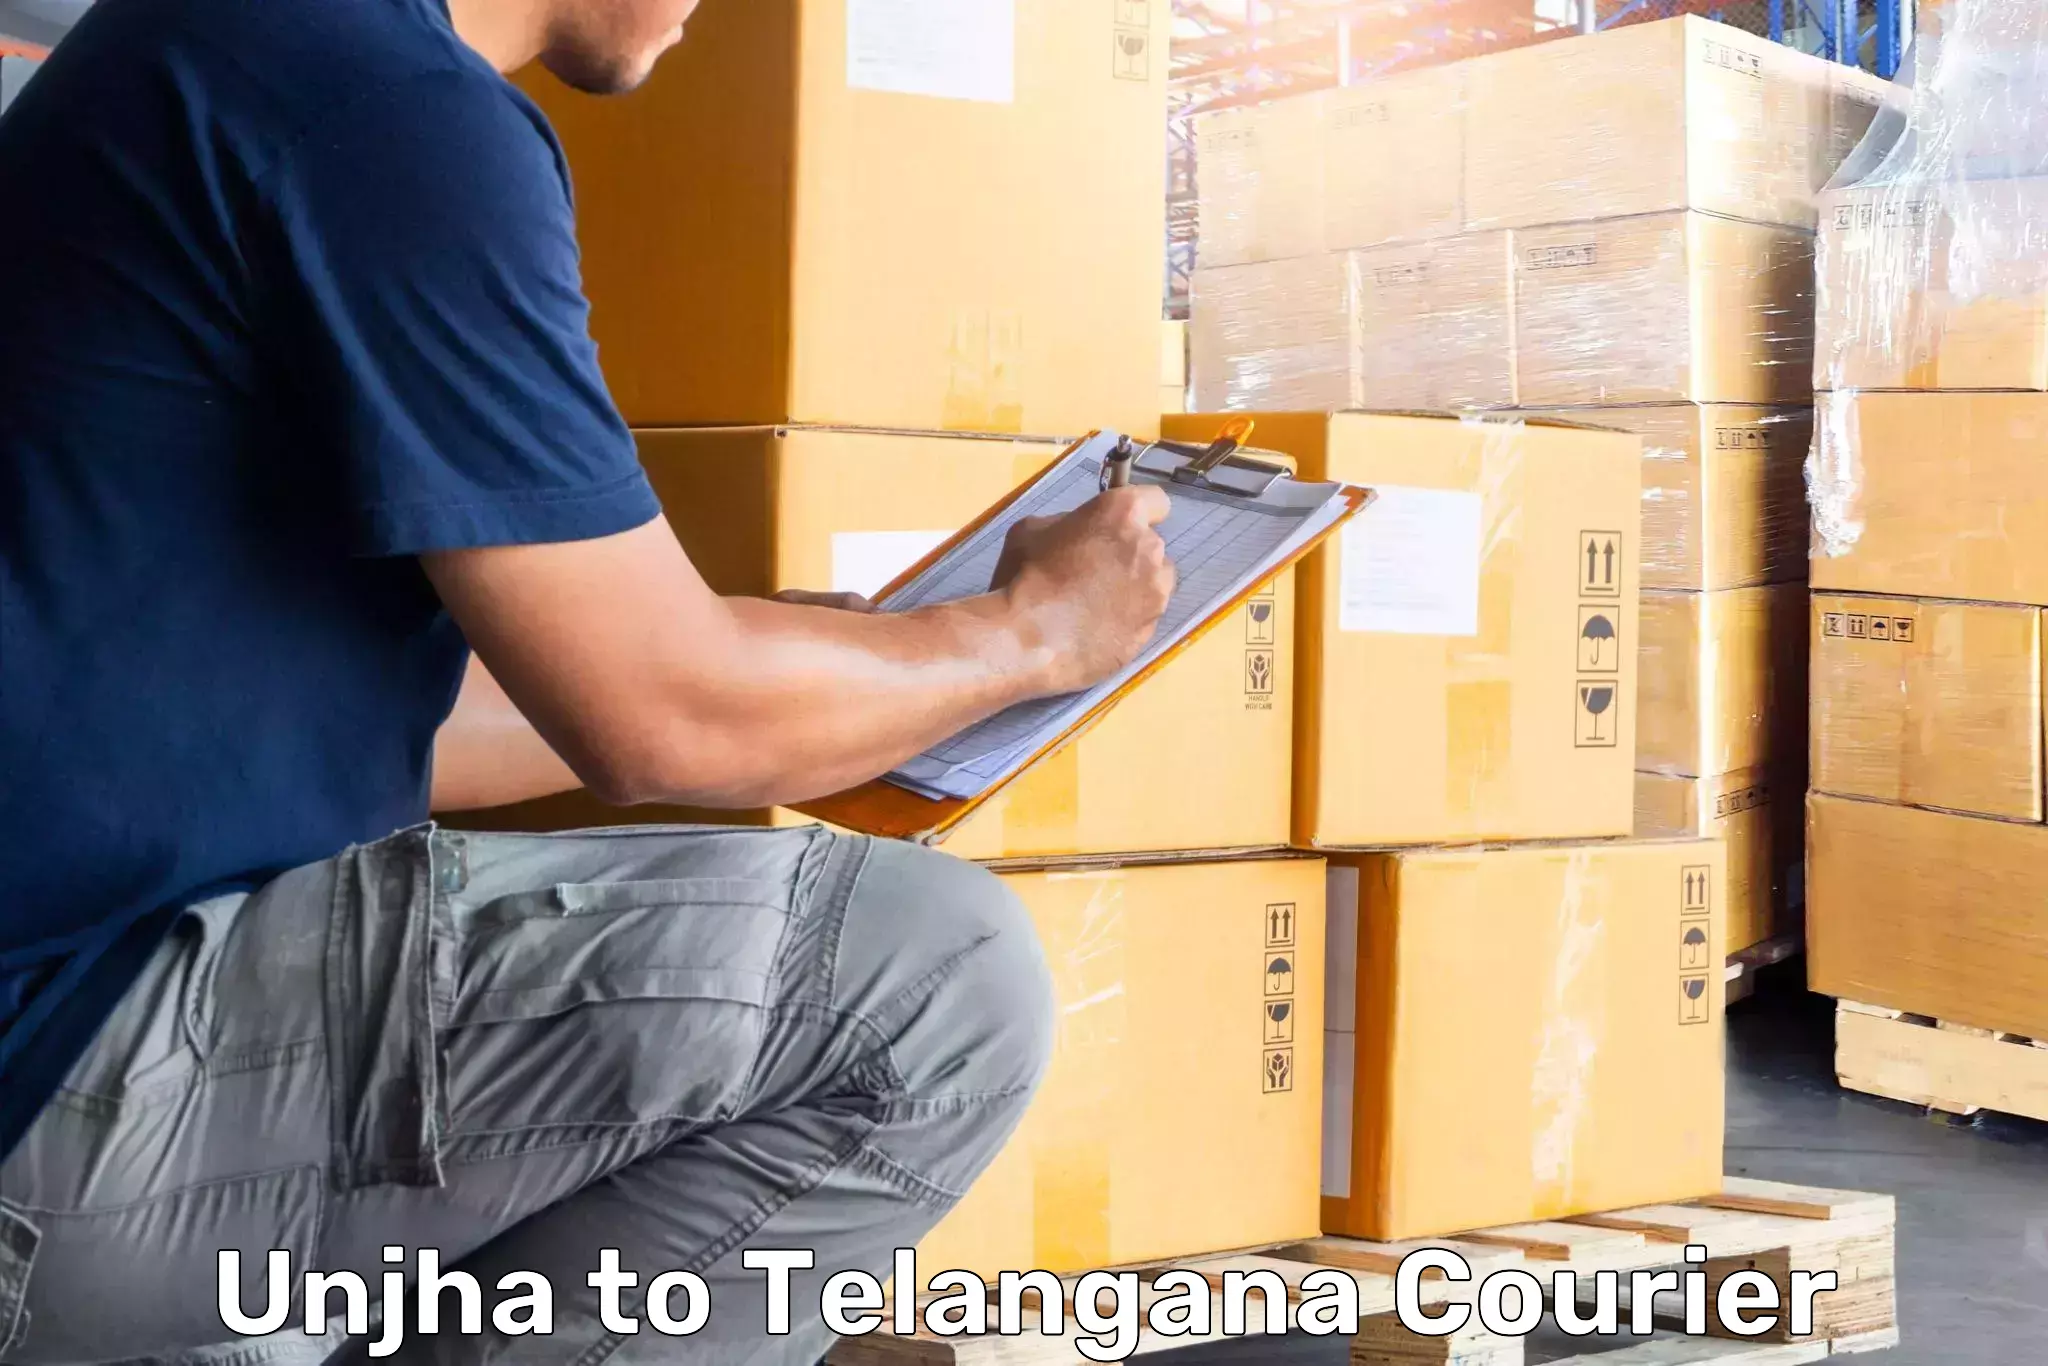 Hassle-free luggage shipping Unjha to Sultanabad